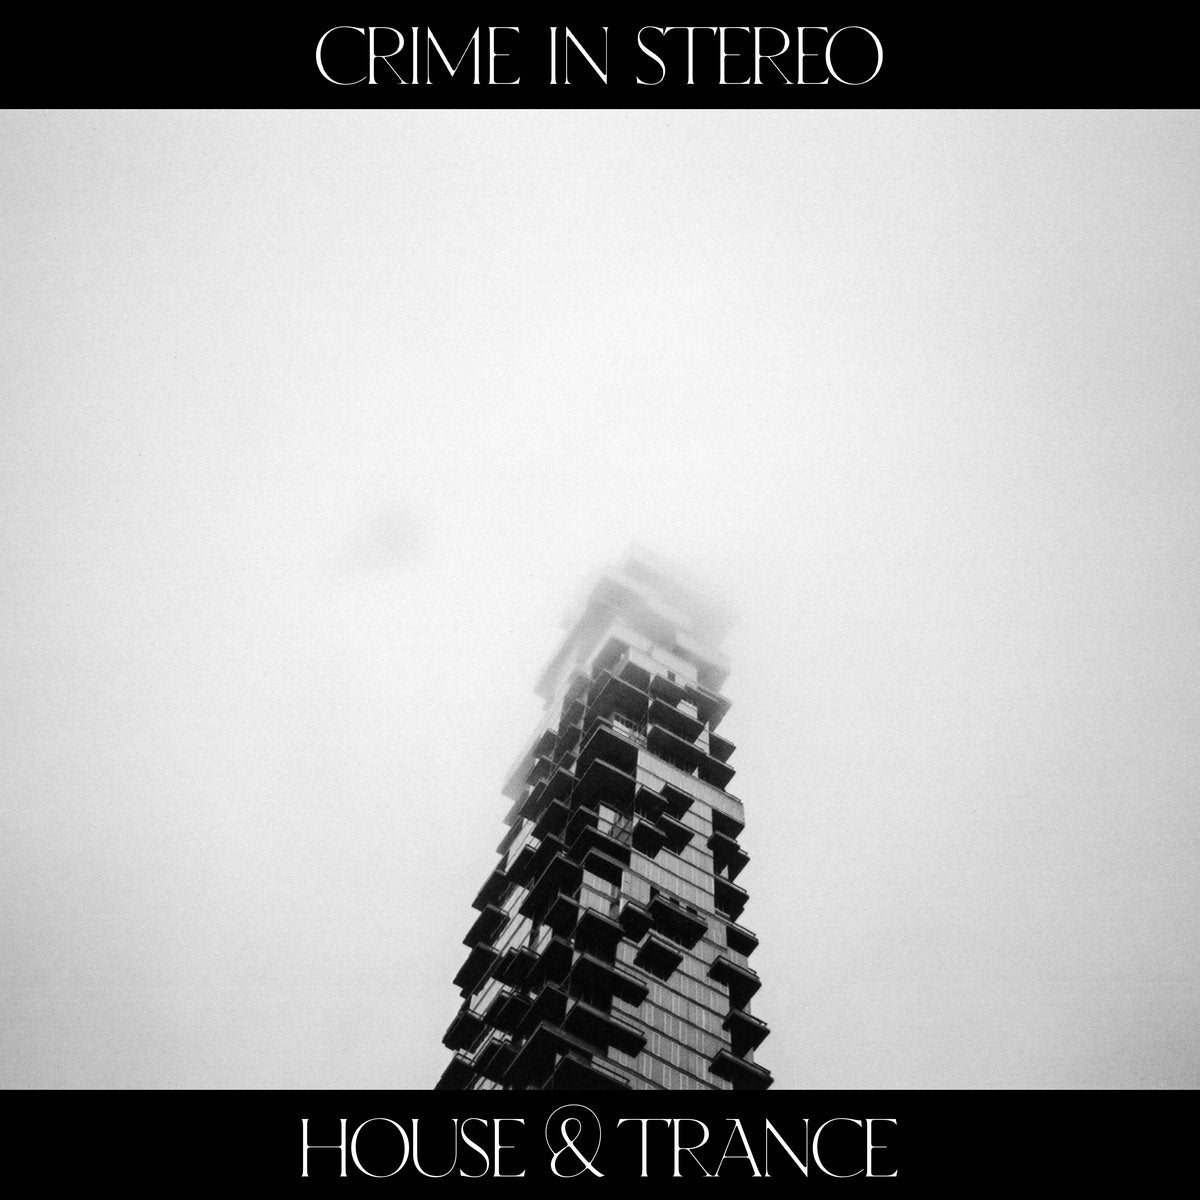 Crime In Stereo "House & Trance" LP